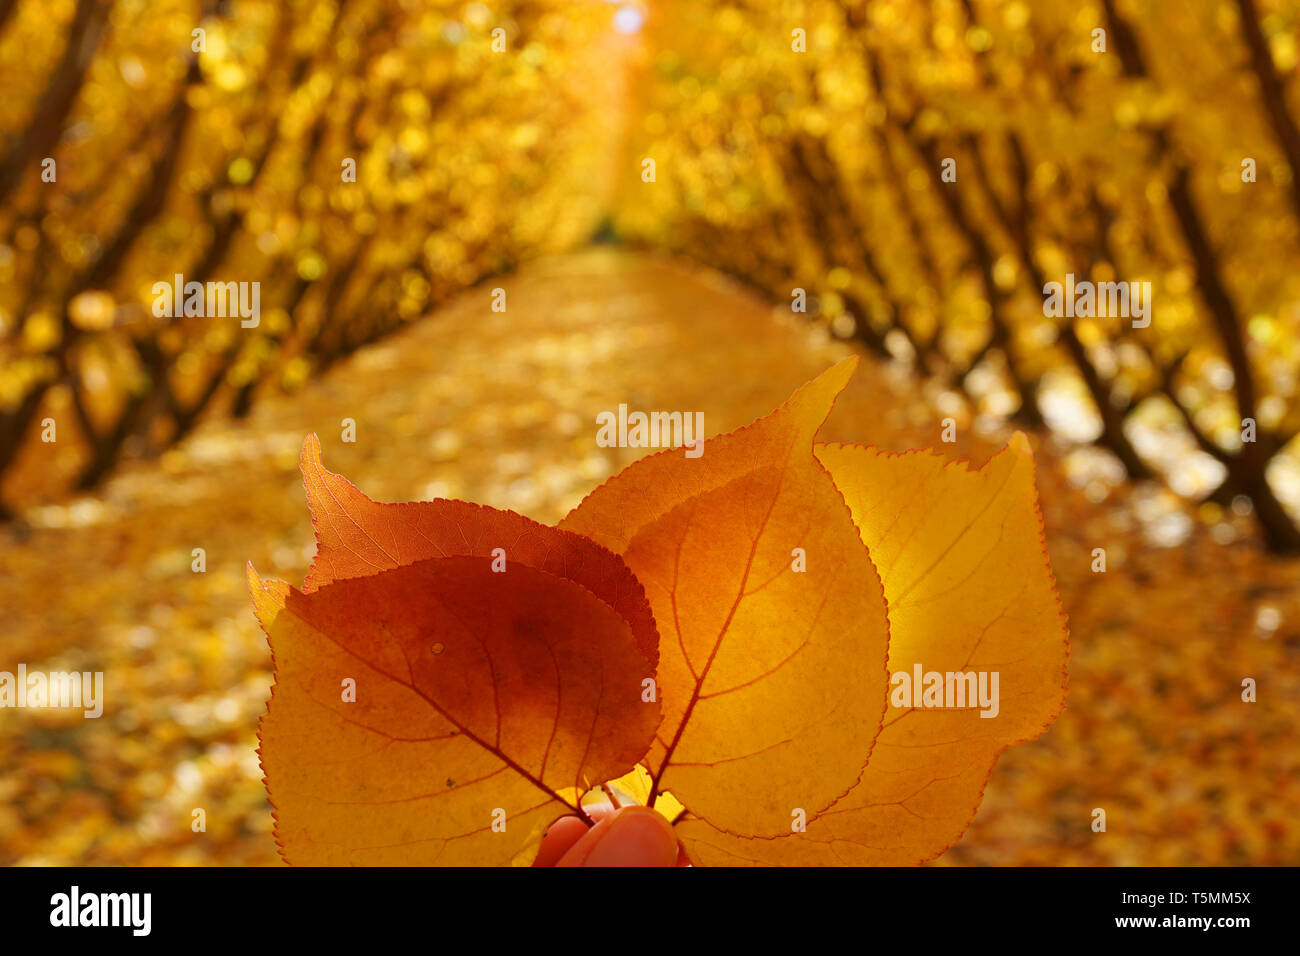 Golden yellow orange red leaf in autumn season close up hand holding with background of symmetric rows of cherry tree fallen yellow leaves in fall Stock Photo